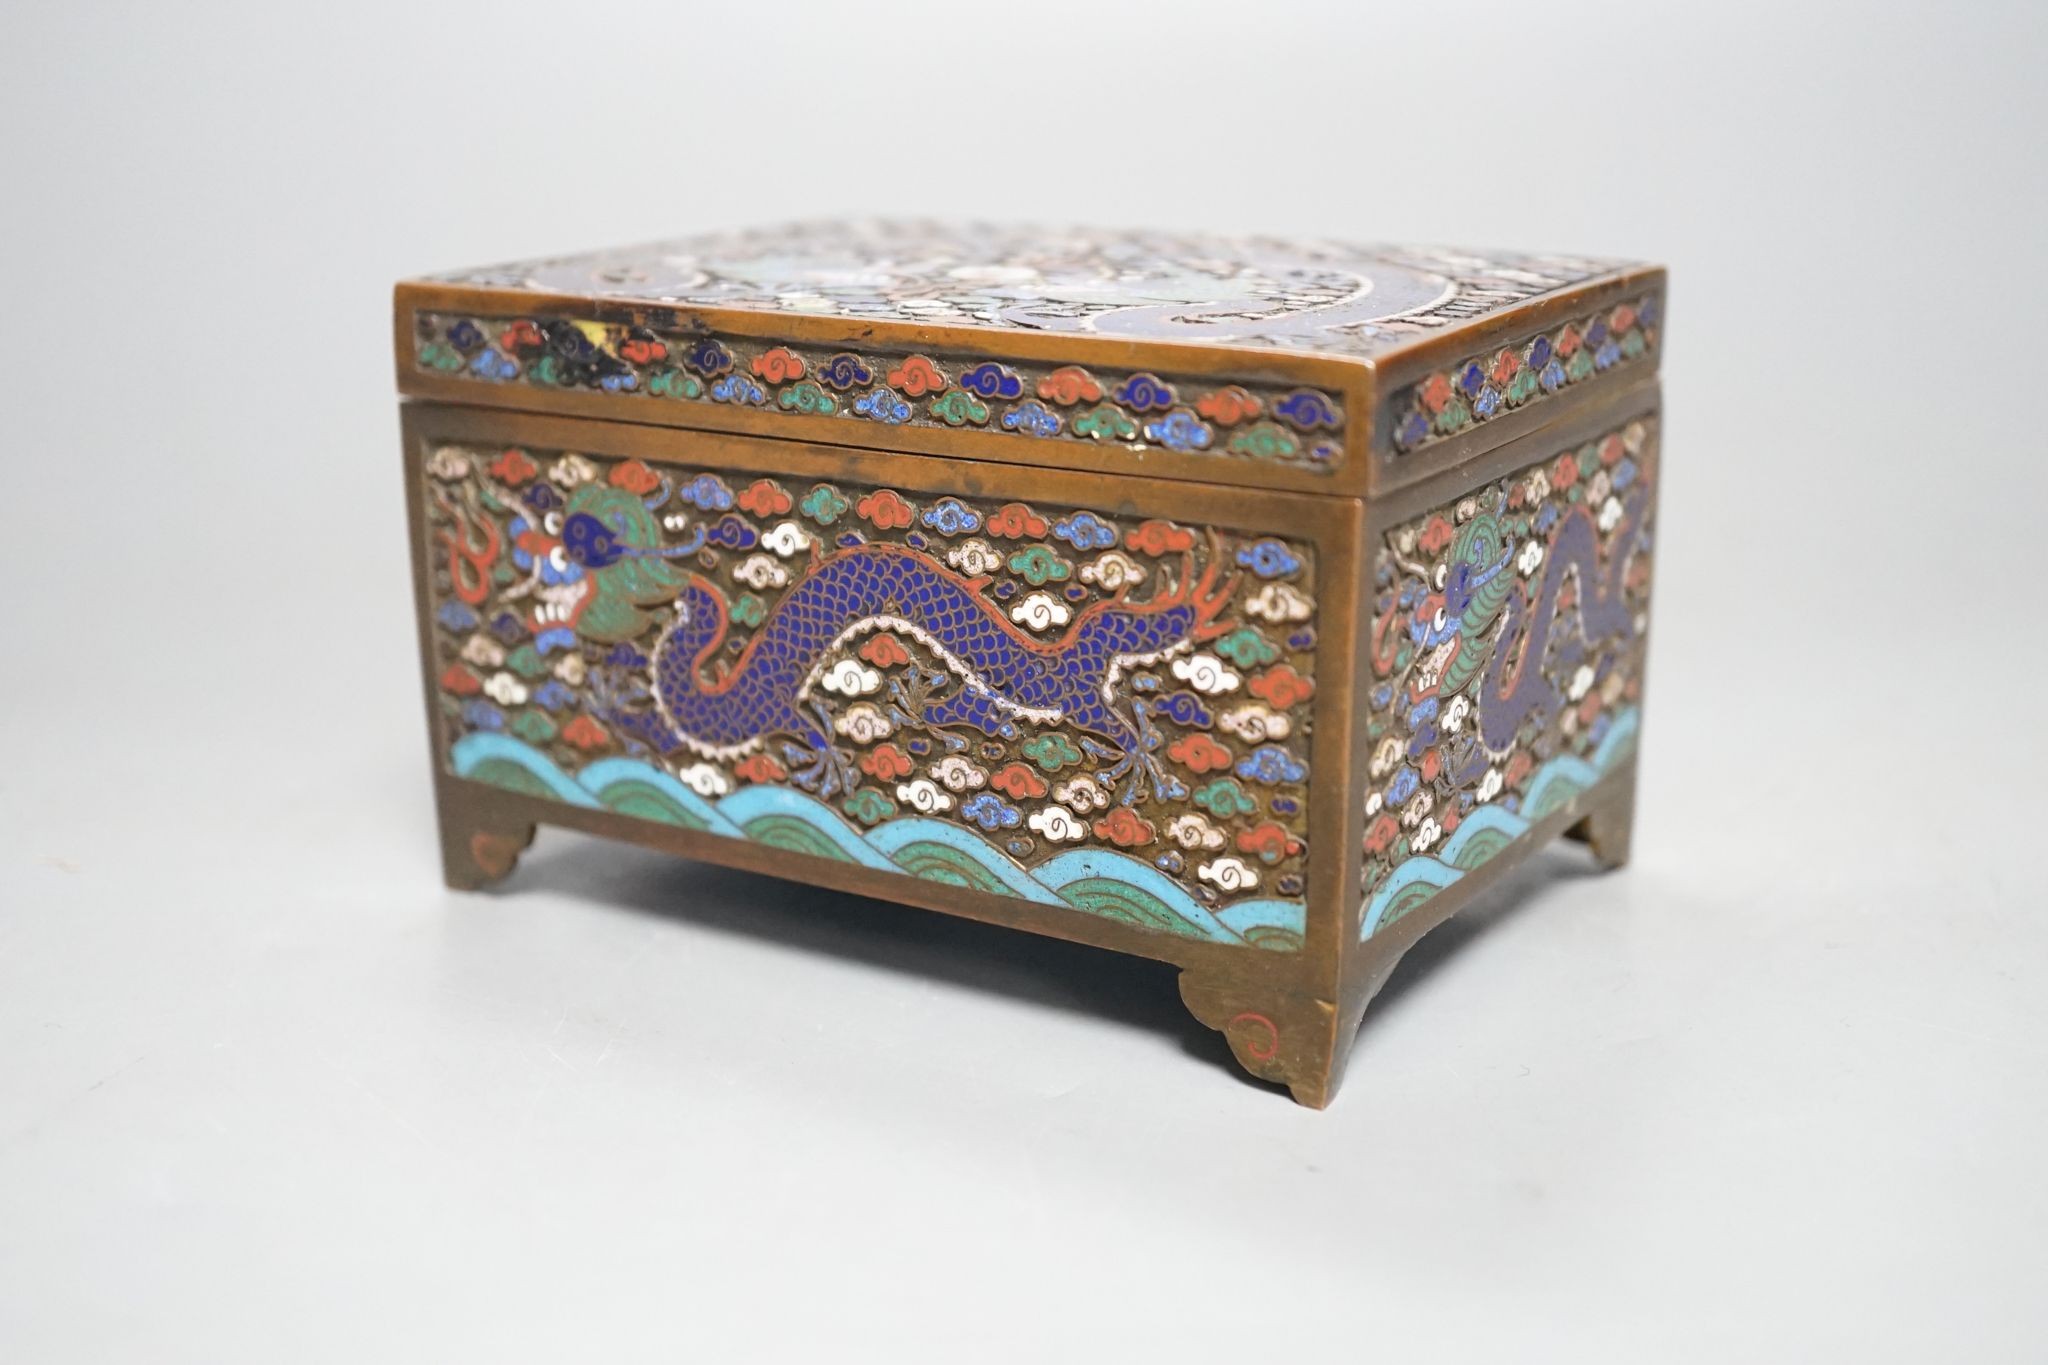 A Chinese bronze and cloisonné enamel ‘dragon’ box and cover, early 20th century, 6 cms high x 11.5 cms wide.